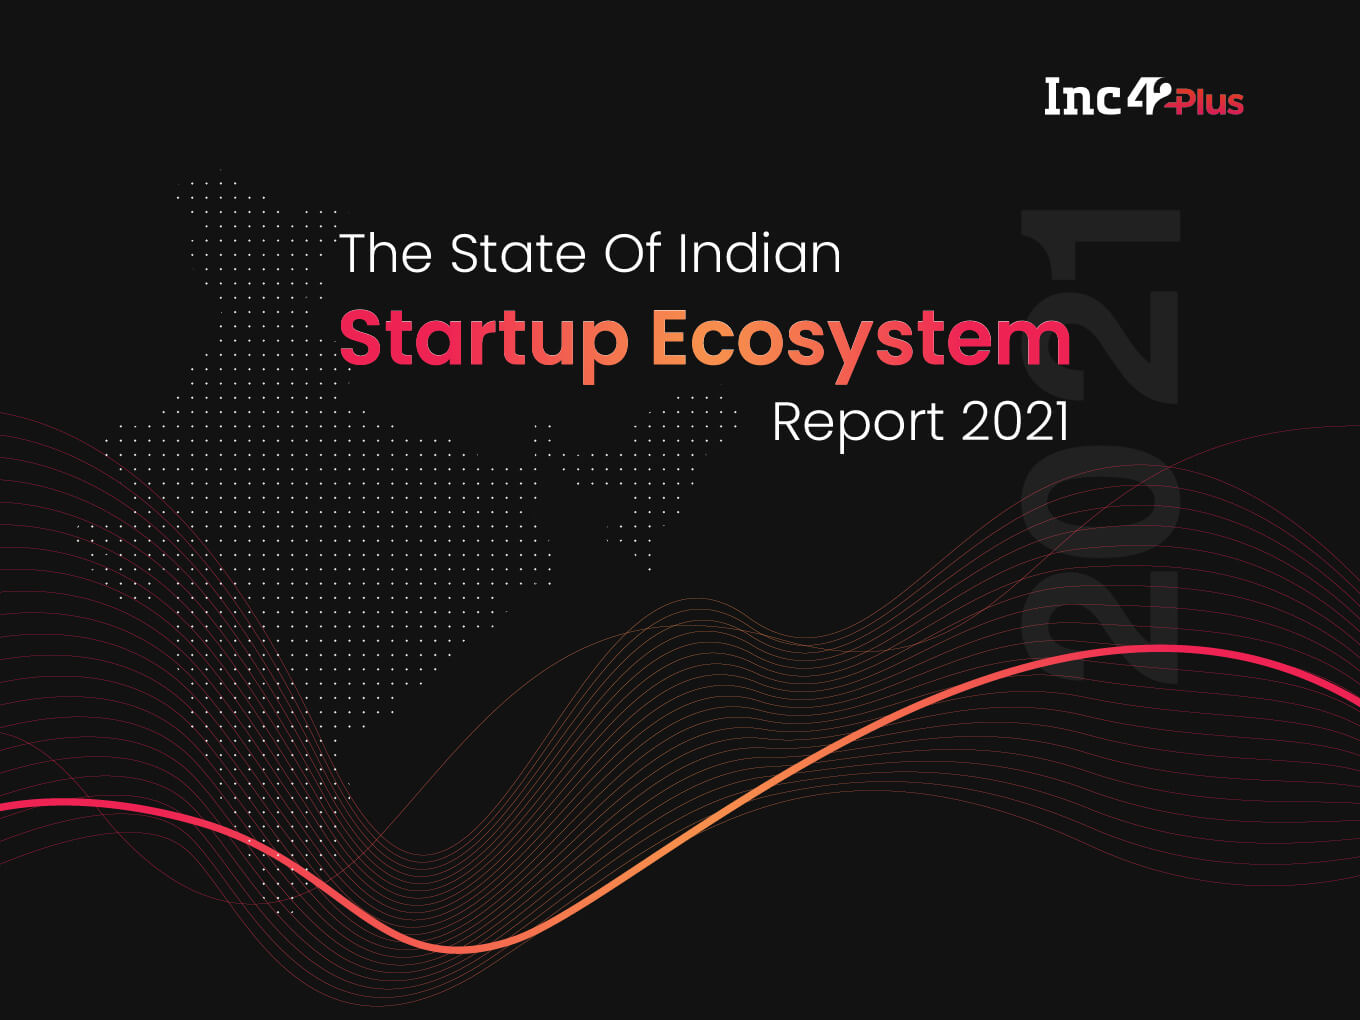 Launching The State Of Indian Startup Ecosystem Report 2021